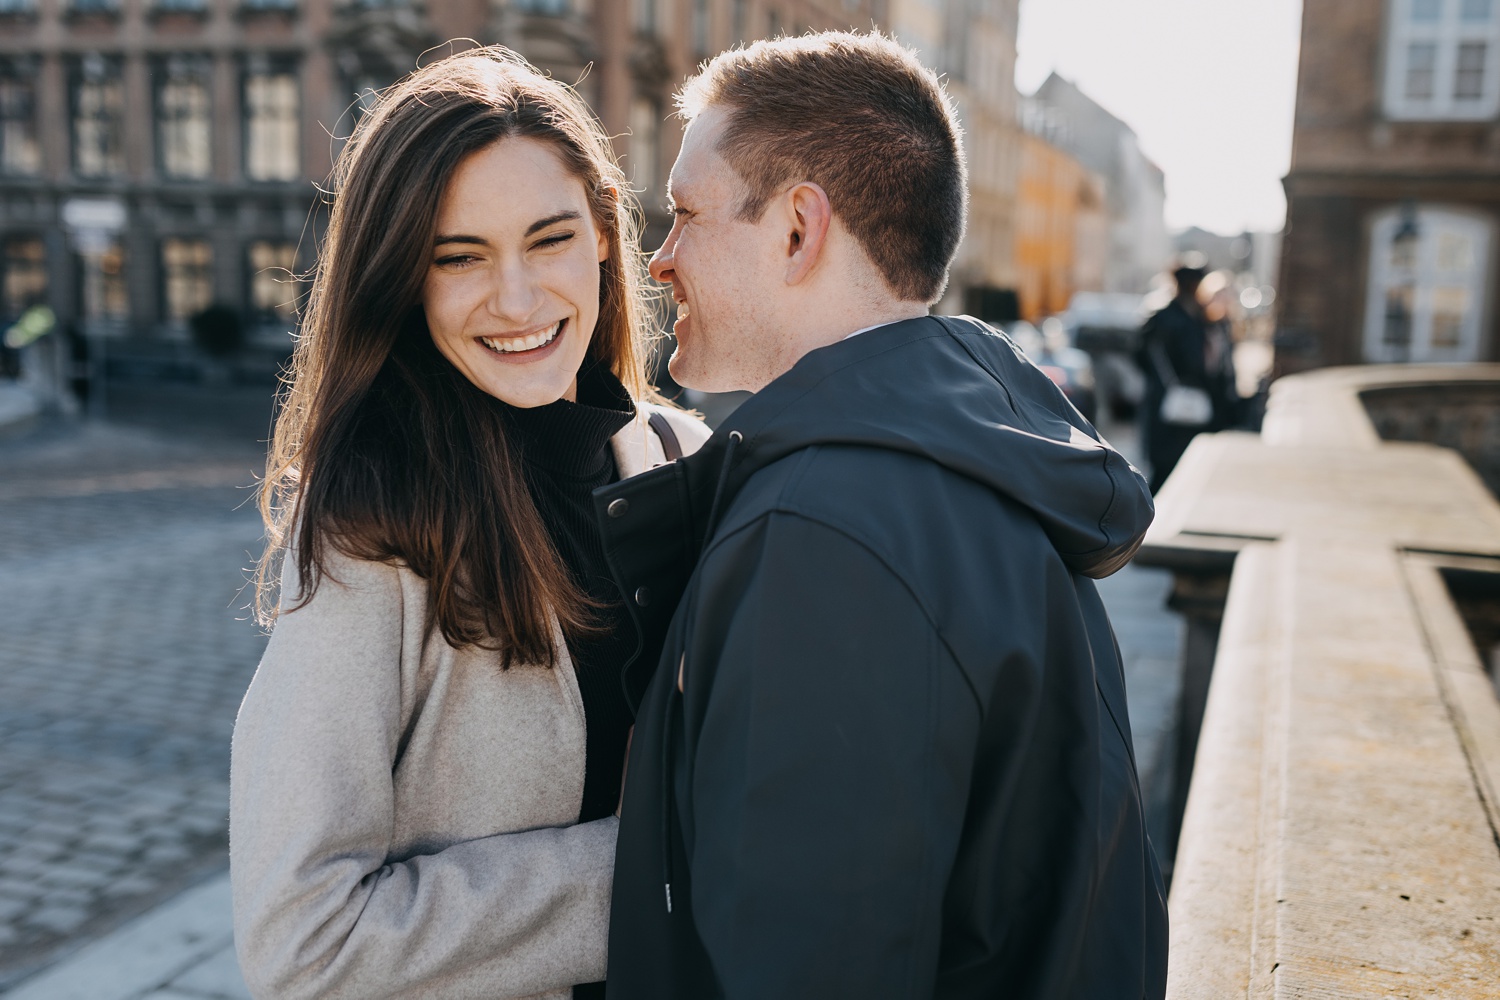 Copenhagen engagement session filled with love and laughter